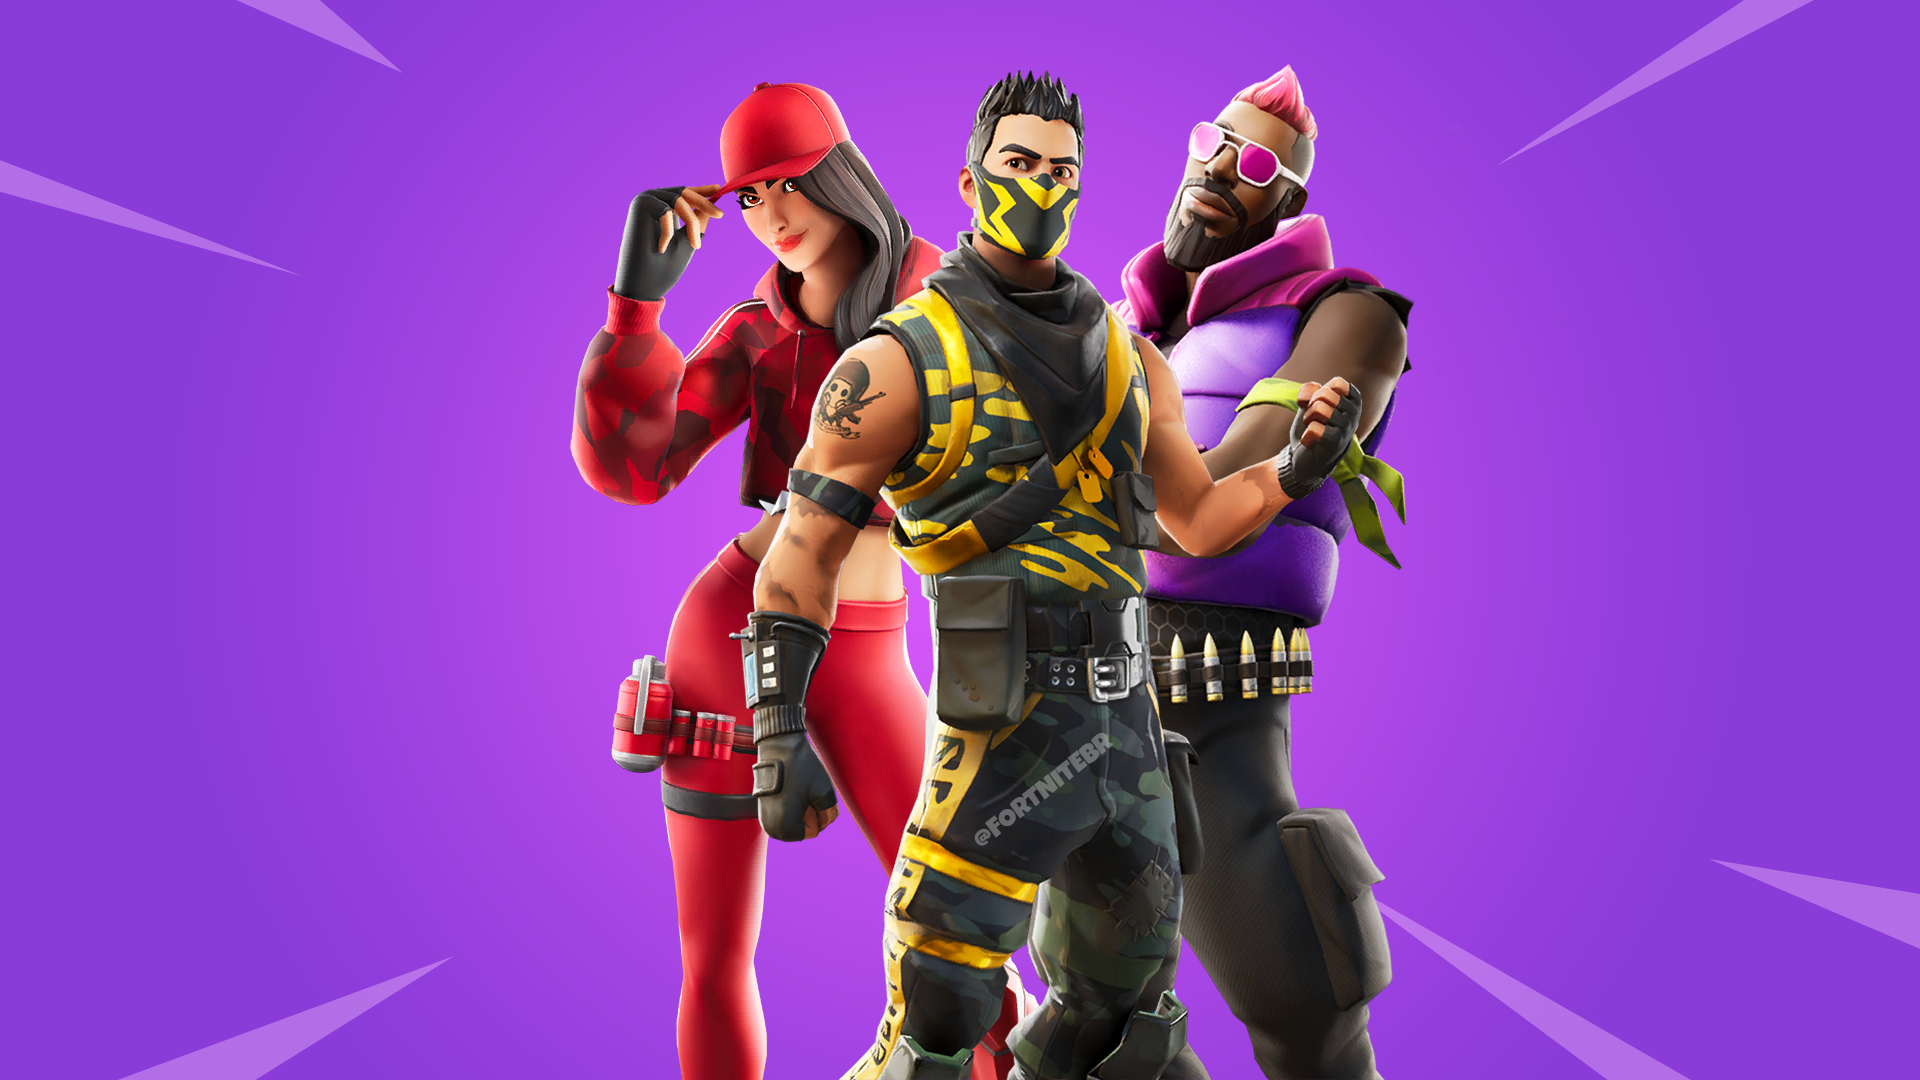 Fortnite Patch v10.40 - All Leaked Cosmetics (Skins, Emotes, Gliders, Wraps)